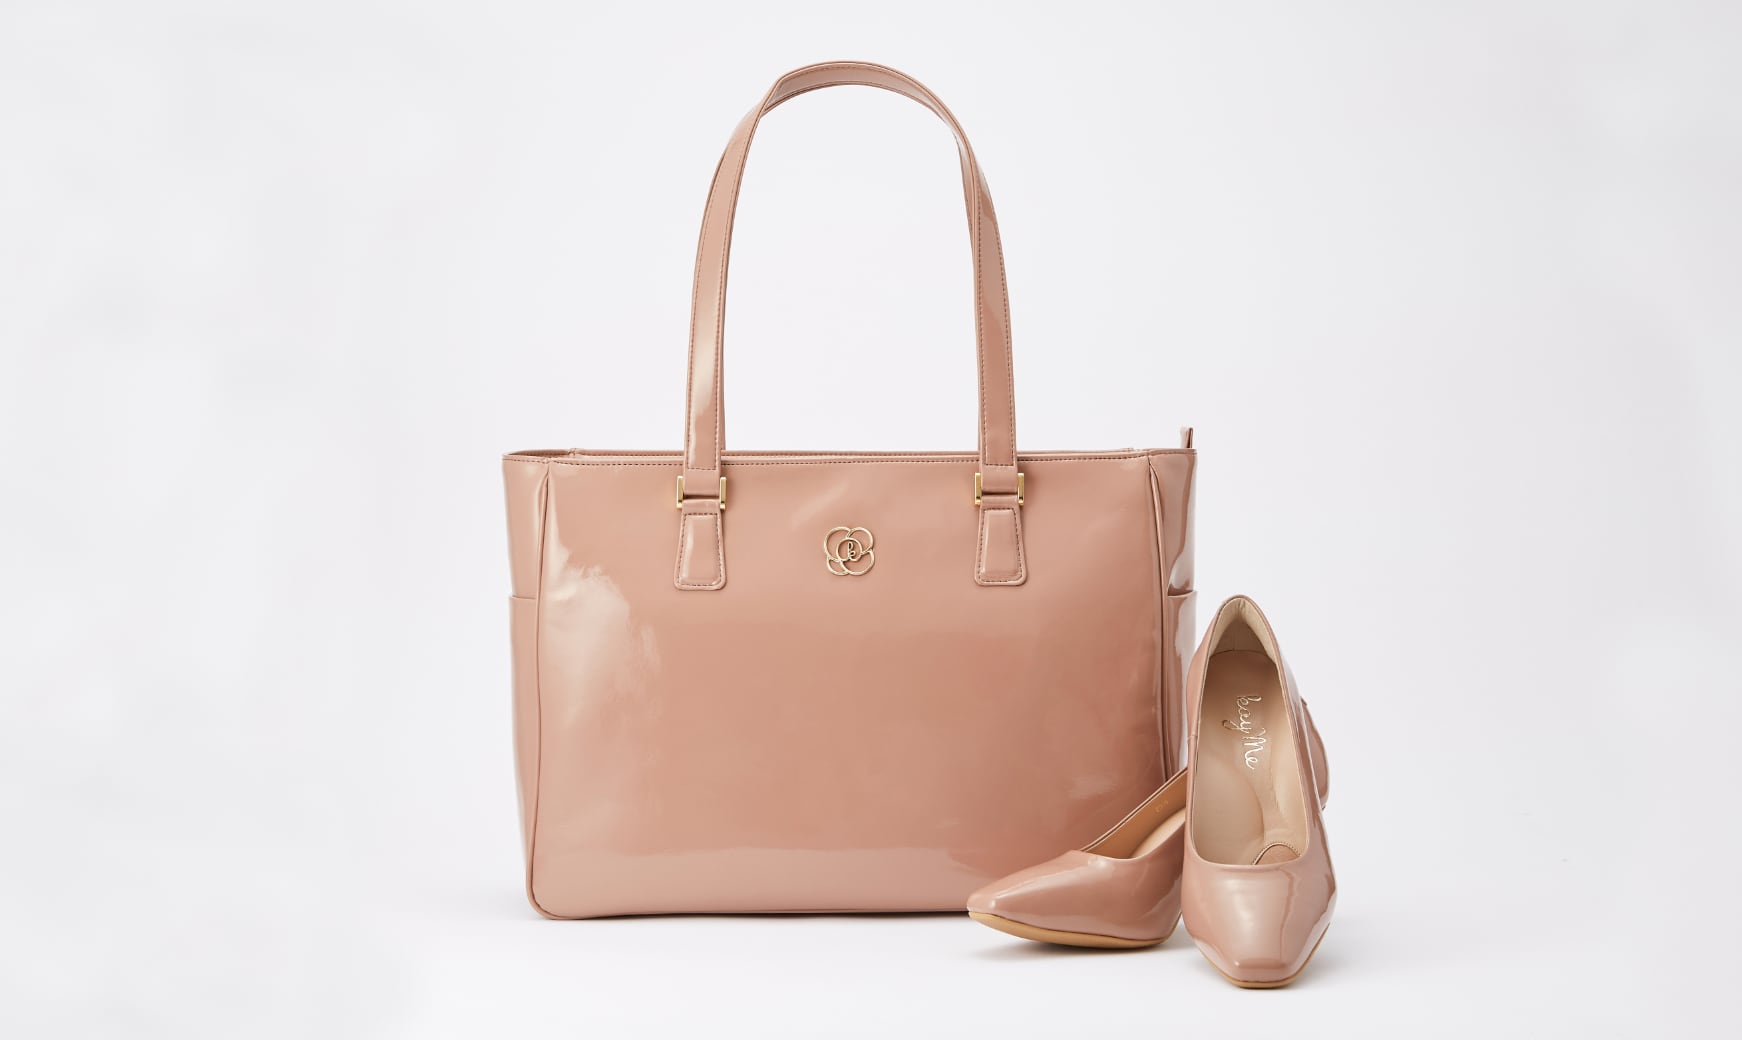 Airy_Tote_and_Puni_Puni_Pumps.jpg